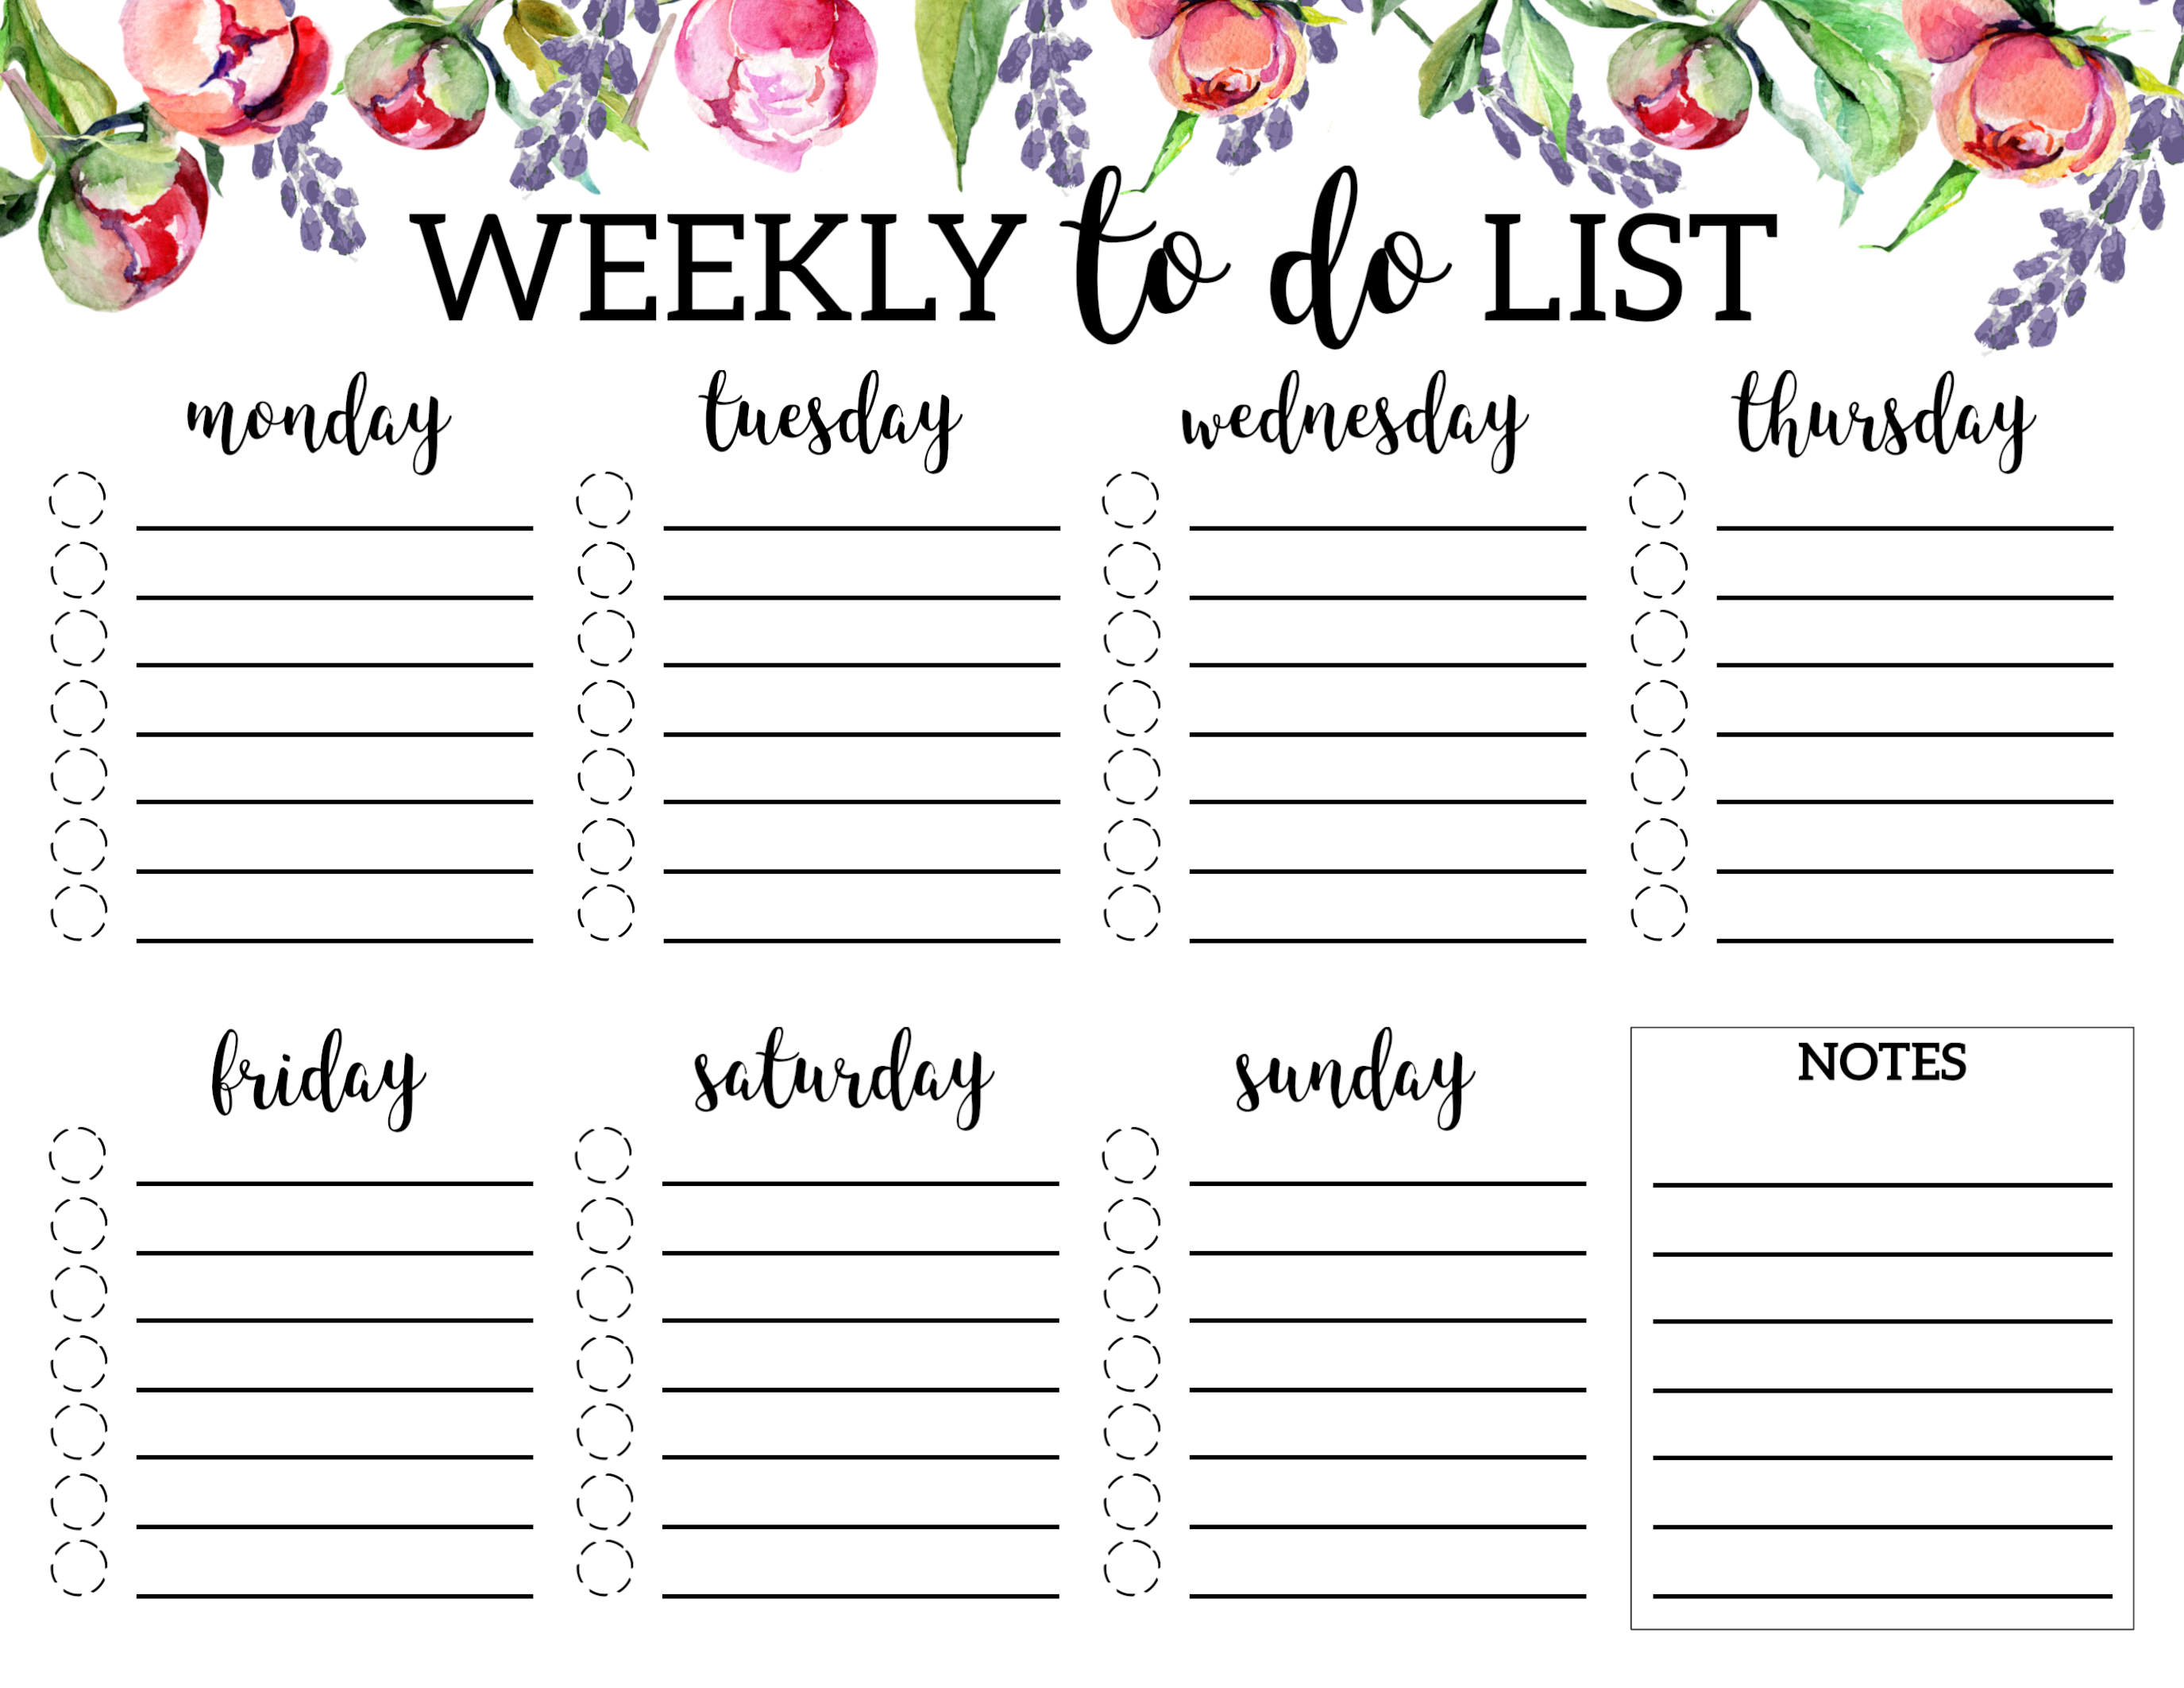 Floral Weekly To Do List Printable Checklist Template - Paper Trail Design